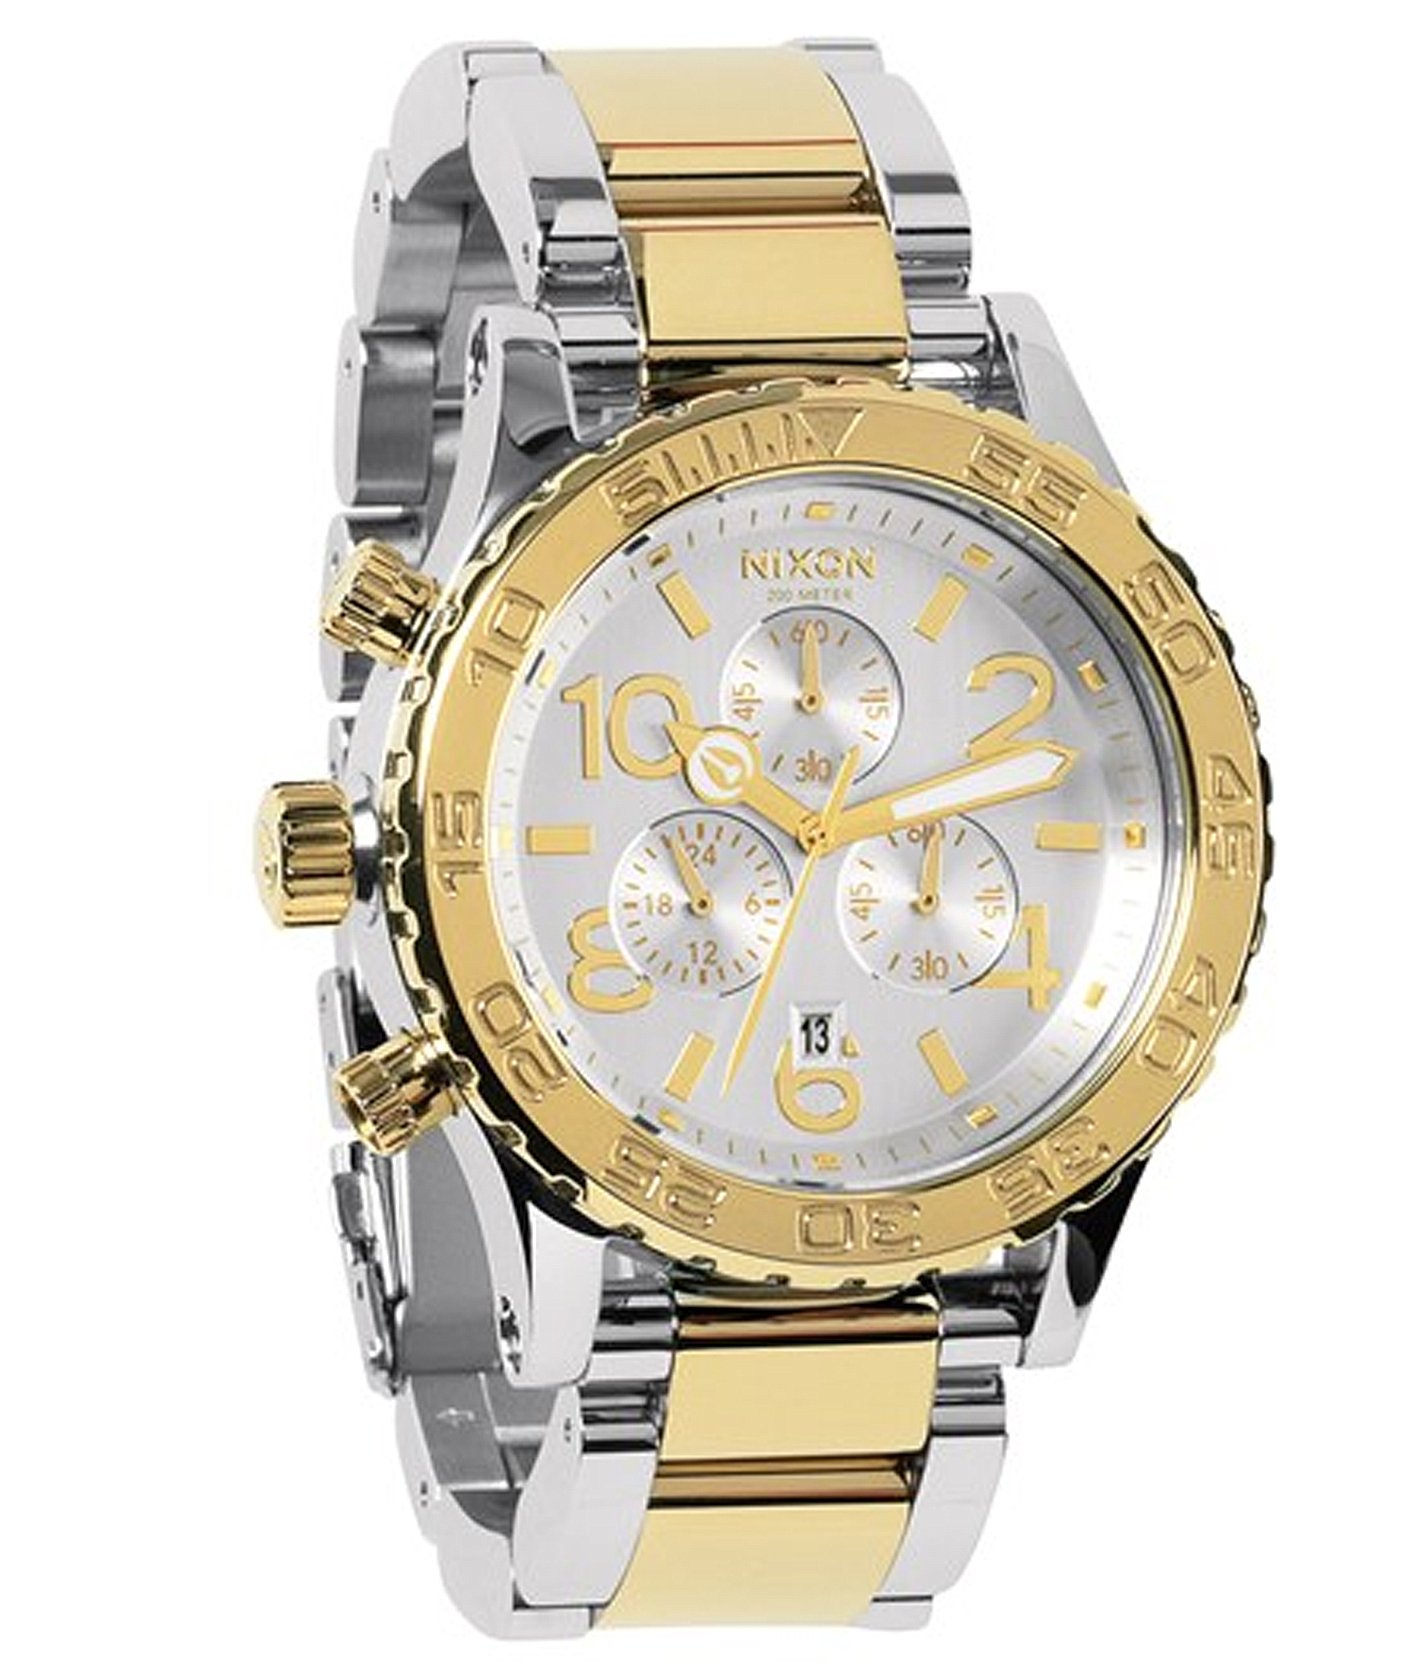 Nixon 42-20 Chrono Watch - Women's Watches in Silver Champagne Gold | Buckle